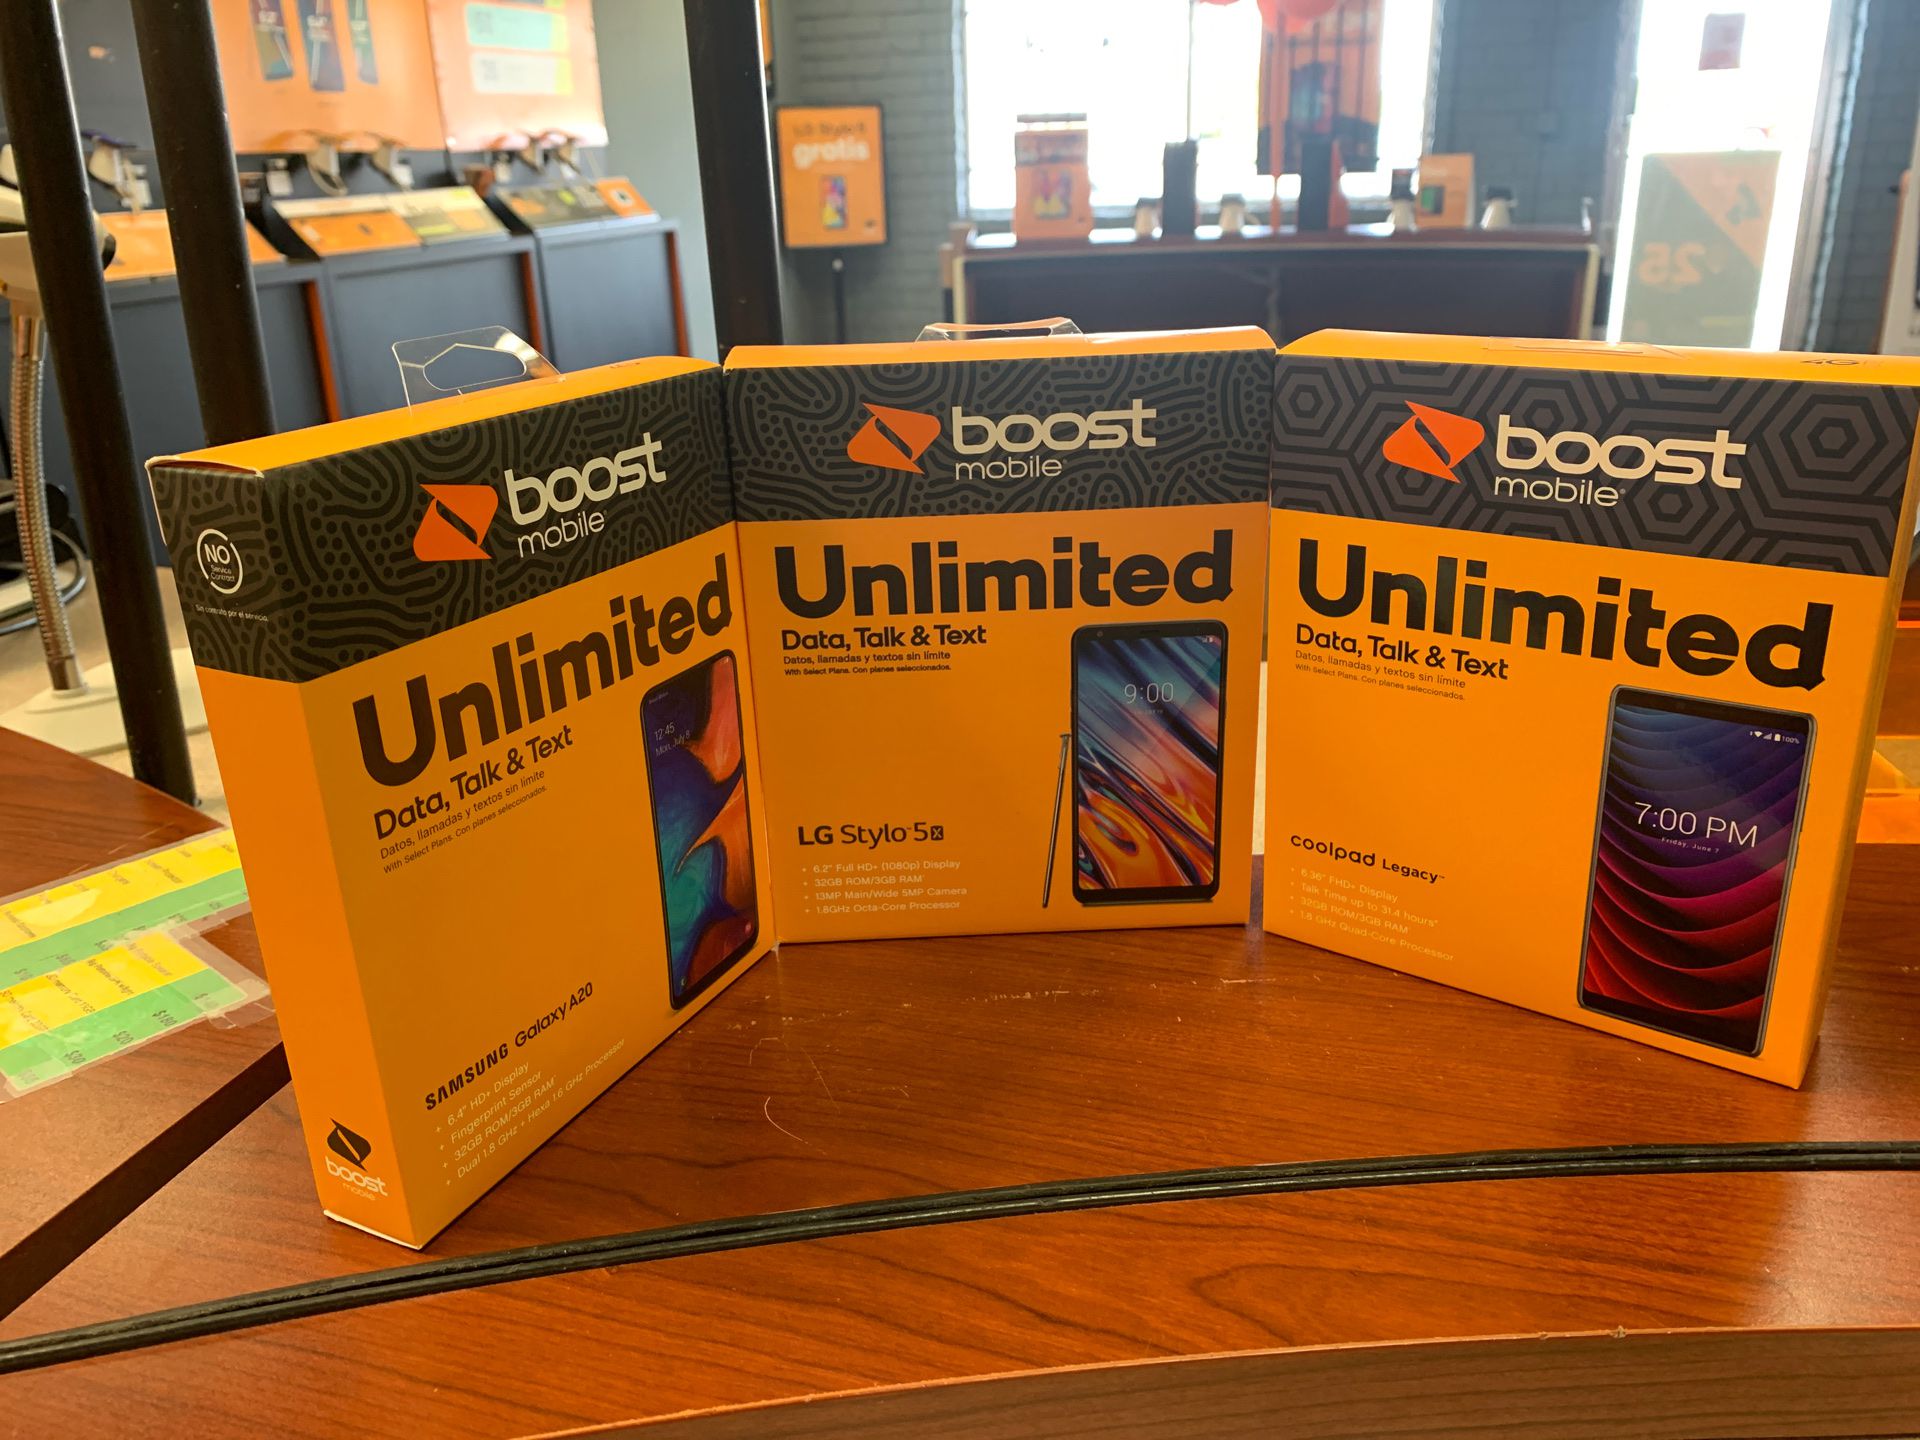 Come save money at boost mobile in el mirage 💰🥳🥳